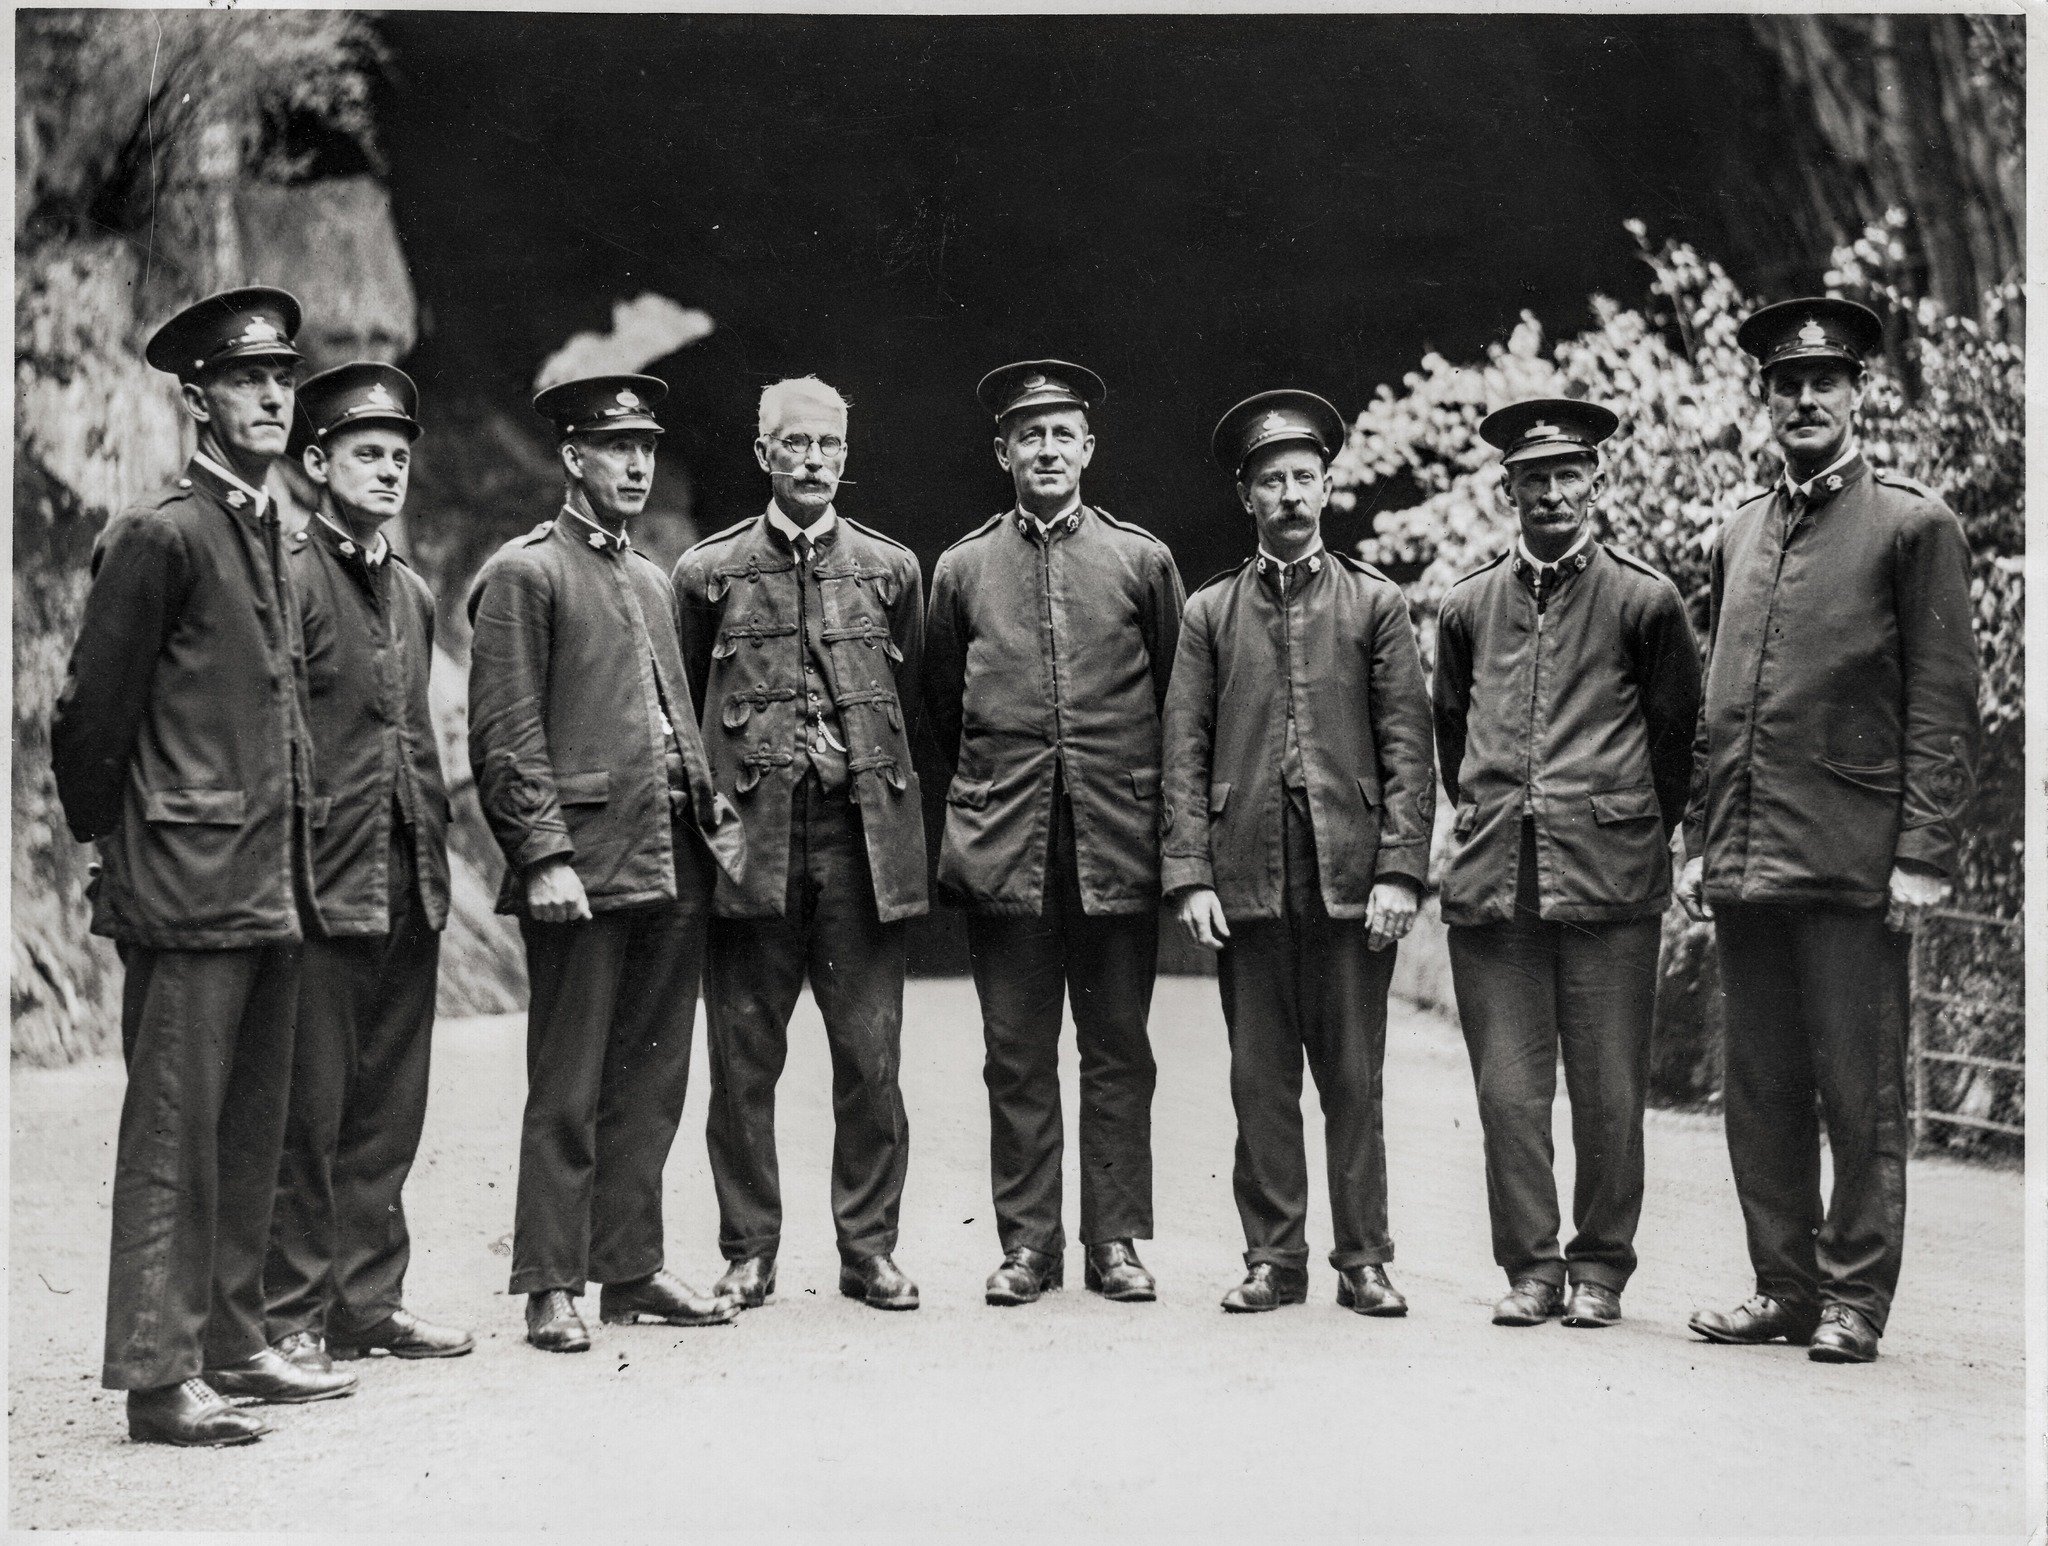 Uniforms of Jenolan Caves.

This photo shows the guides uniforms in 1923.

We think the hats are a great addition to the uniform!

📸 JenolanCaves